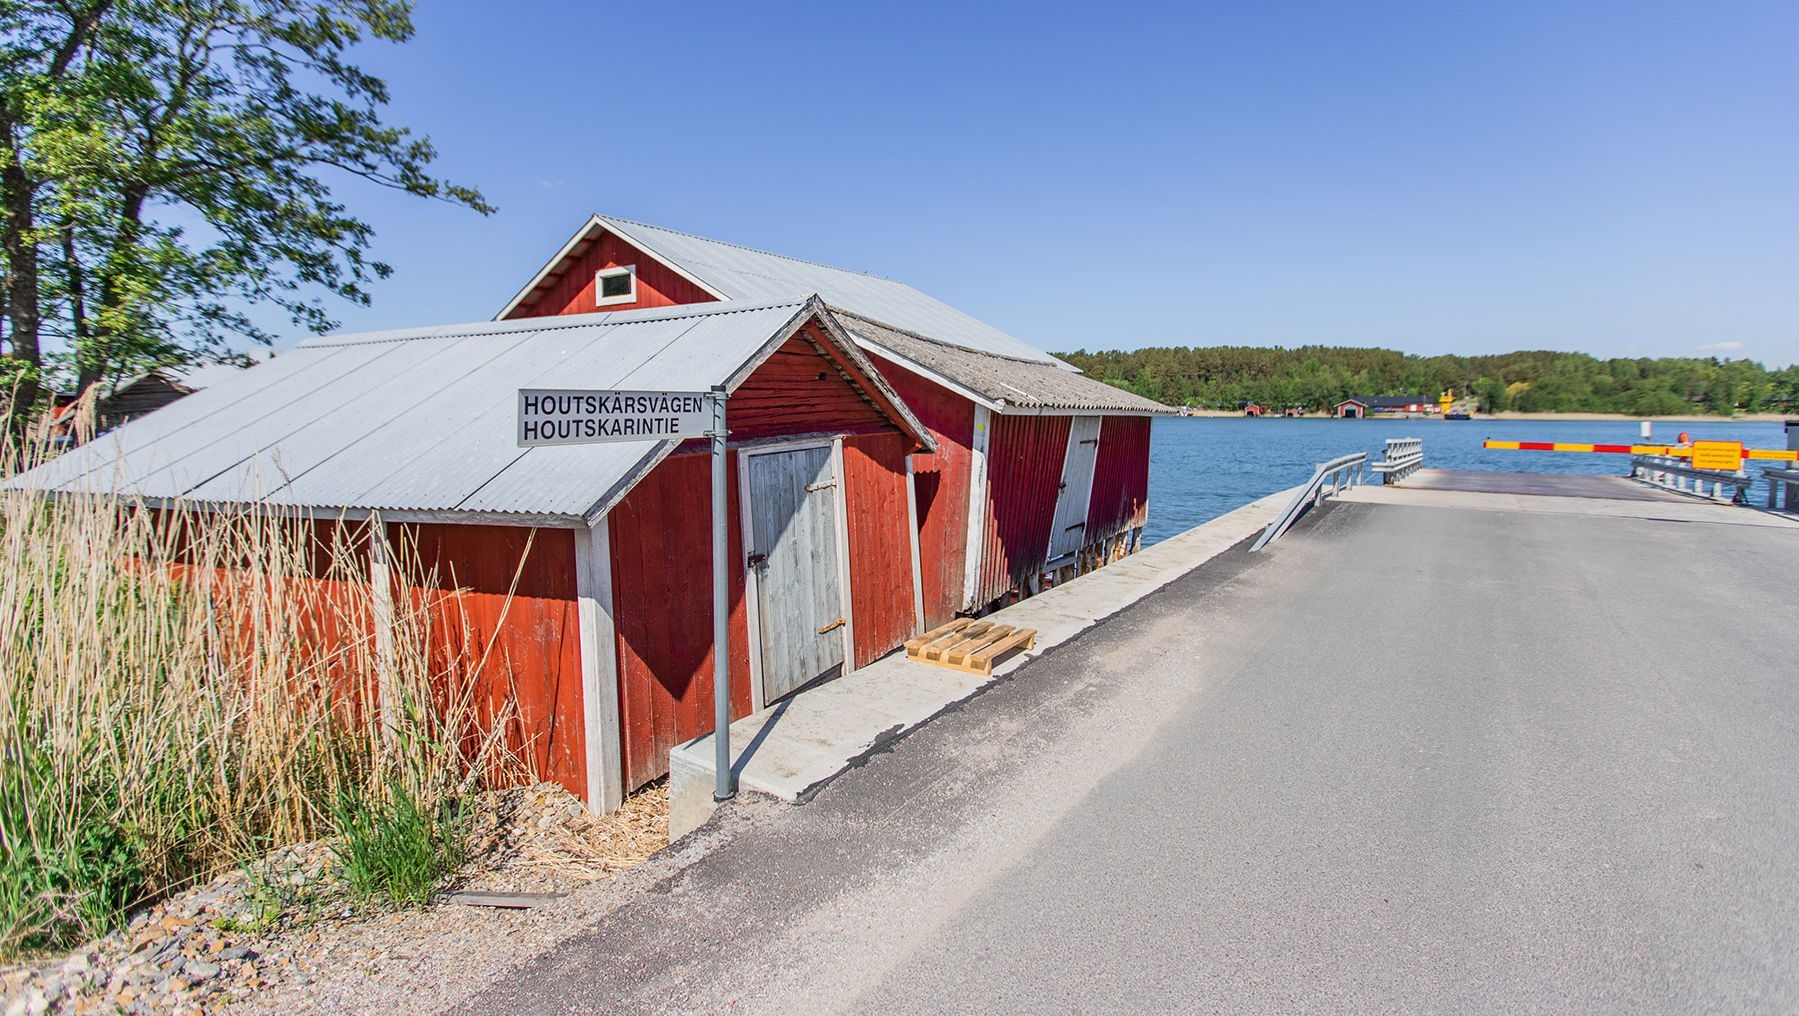 A ferry stop on Houtskär, next to a traditional wooden building.